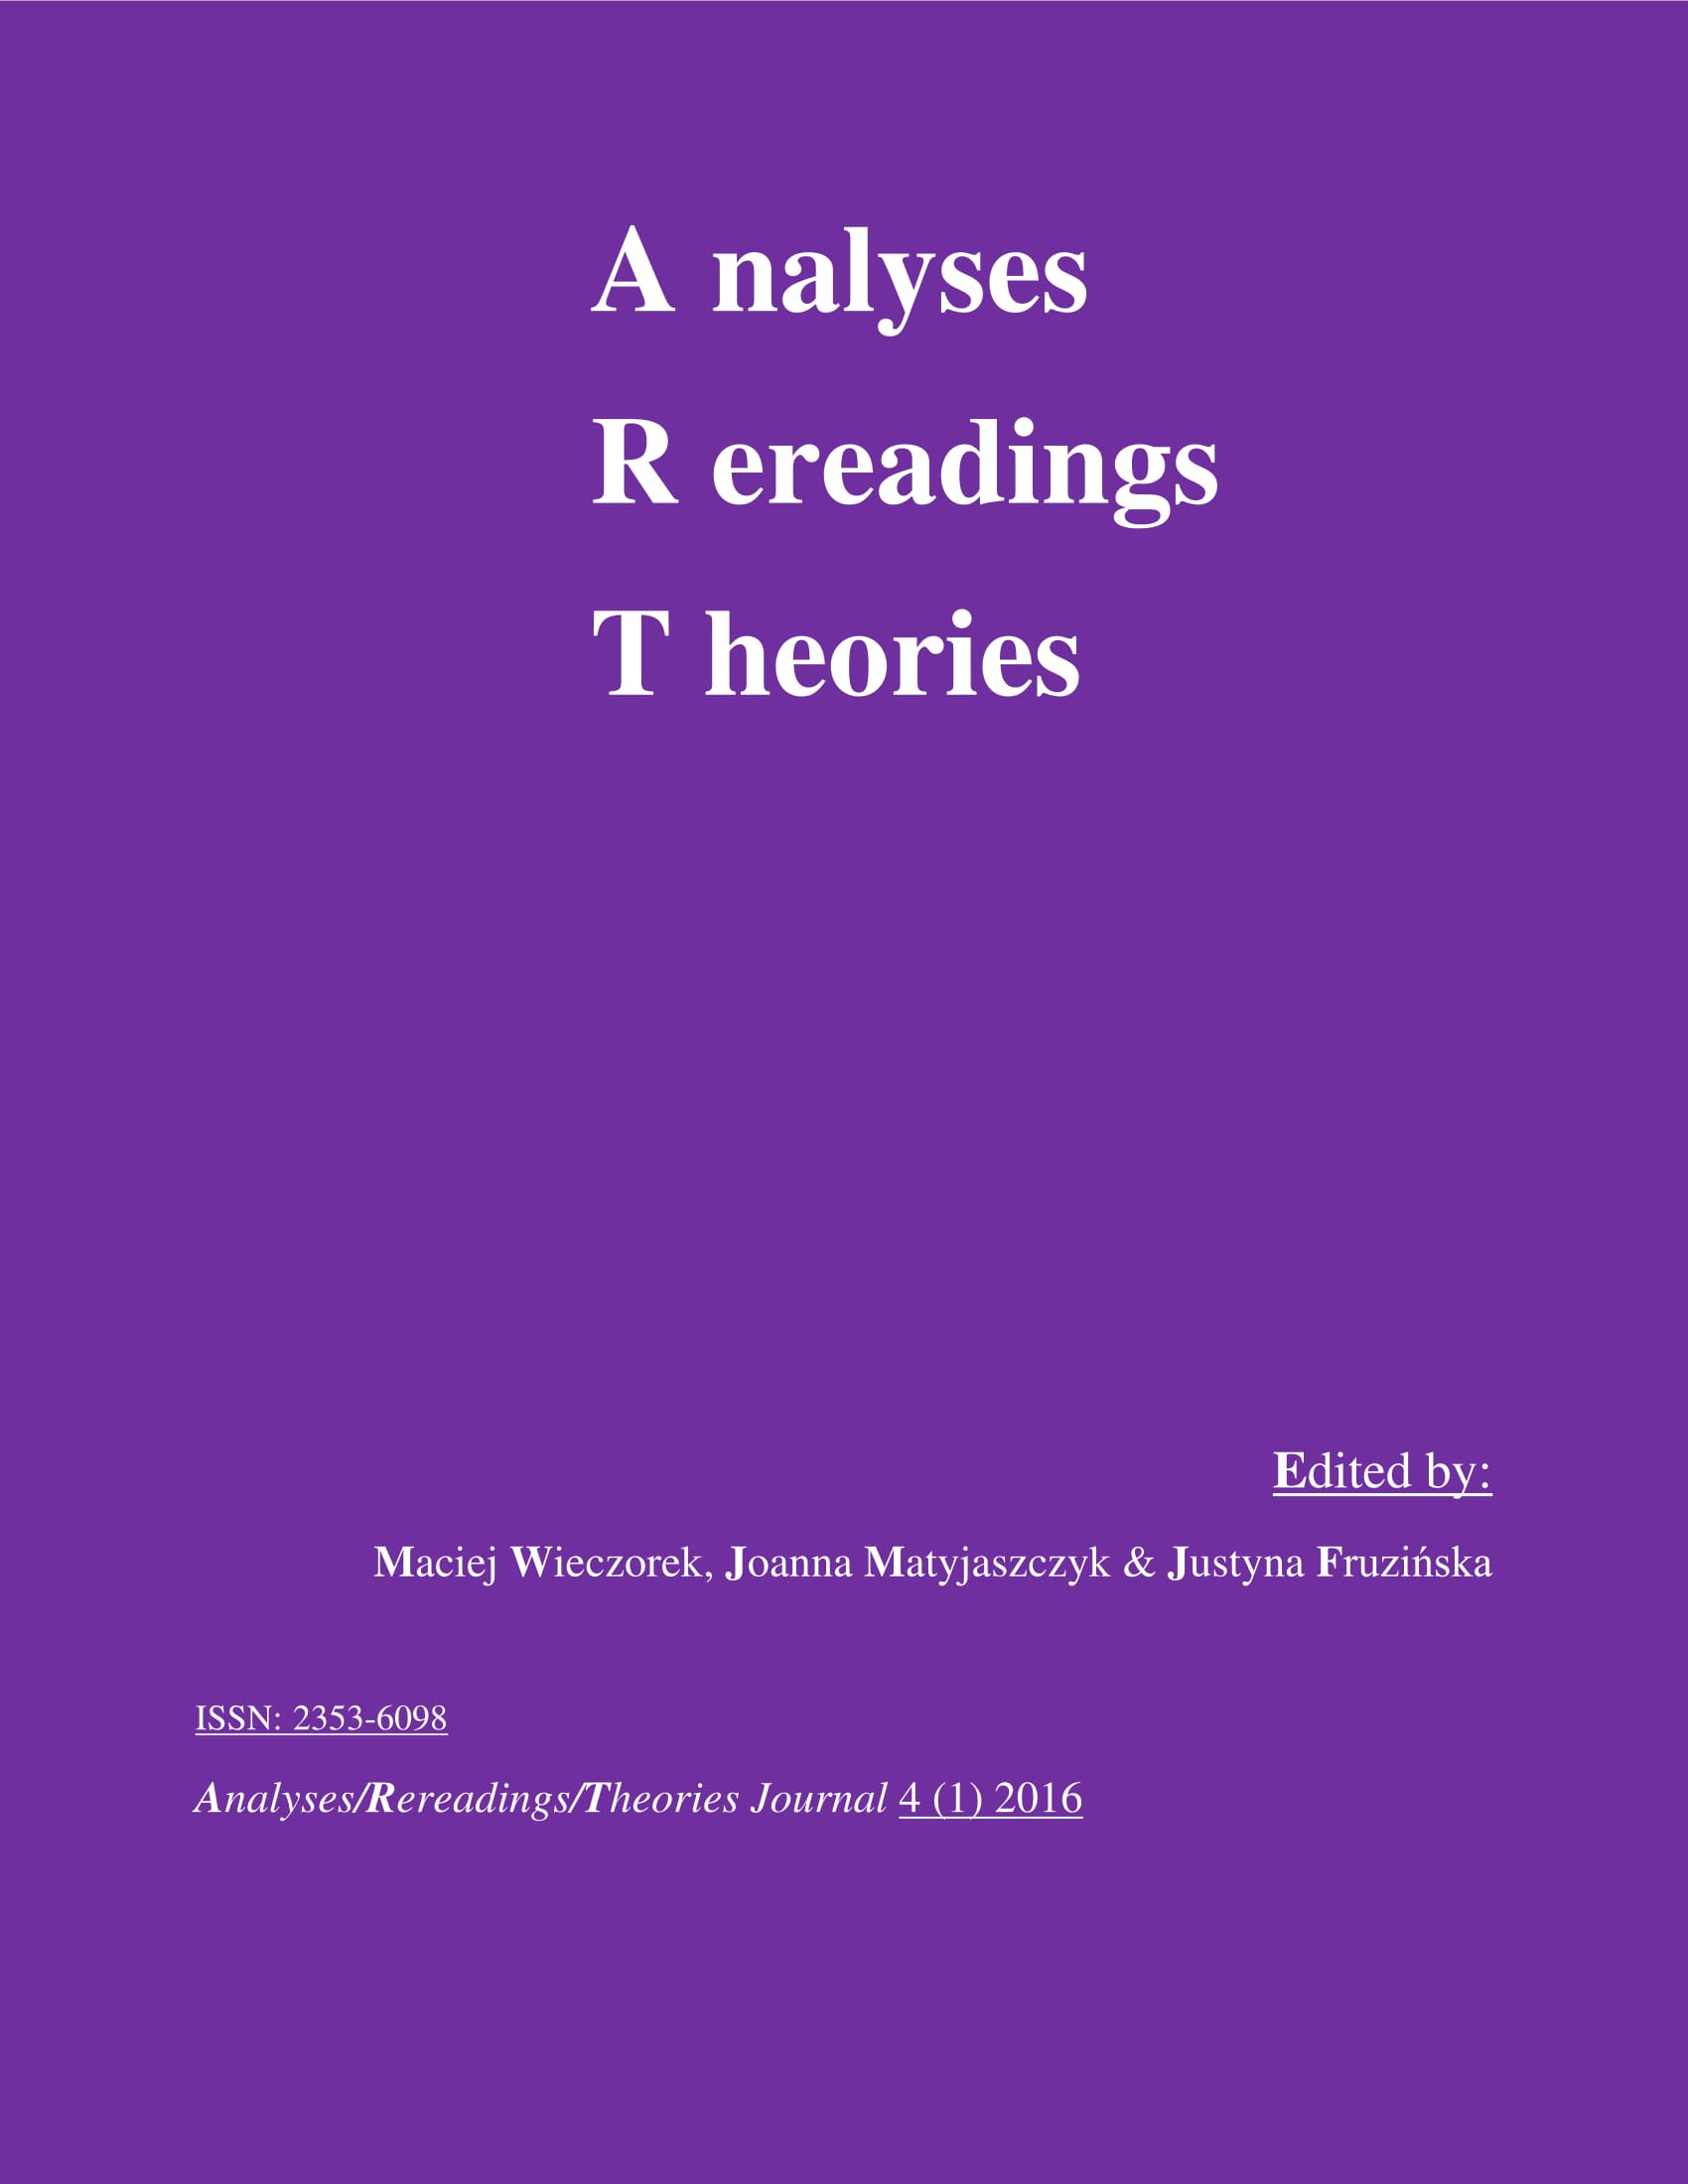 Analyses/Rerearings/Theories (A/R/T) Journal